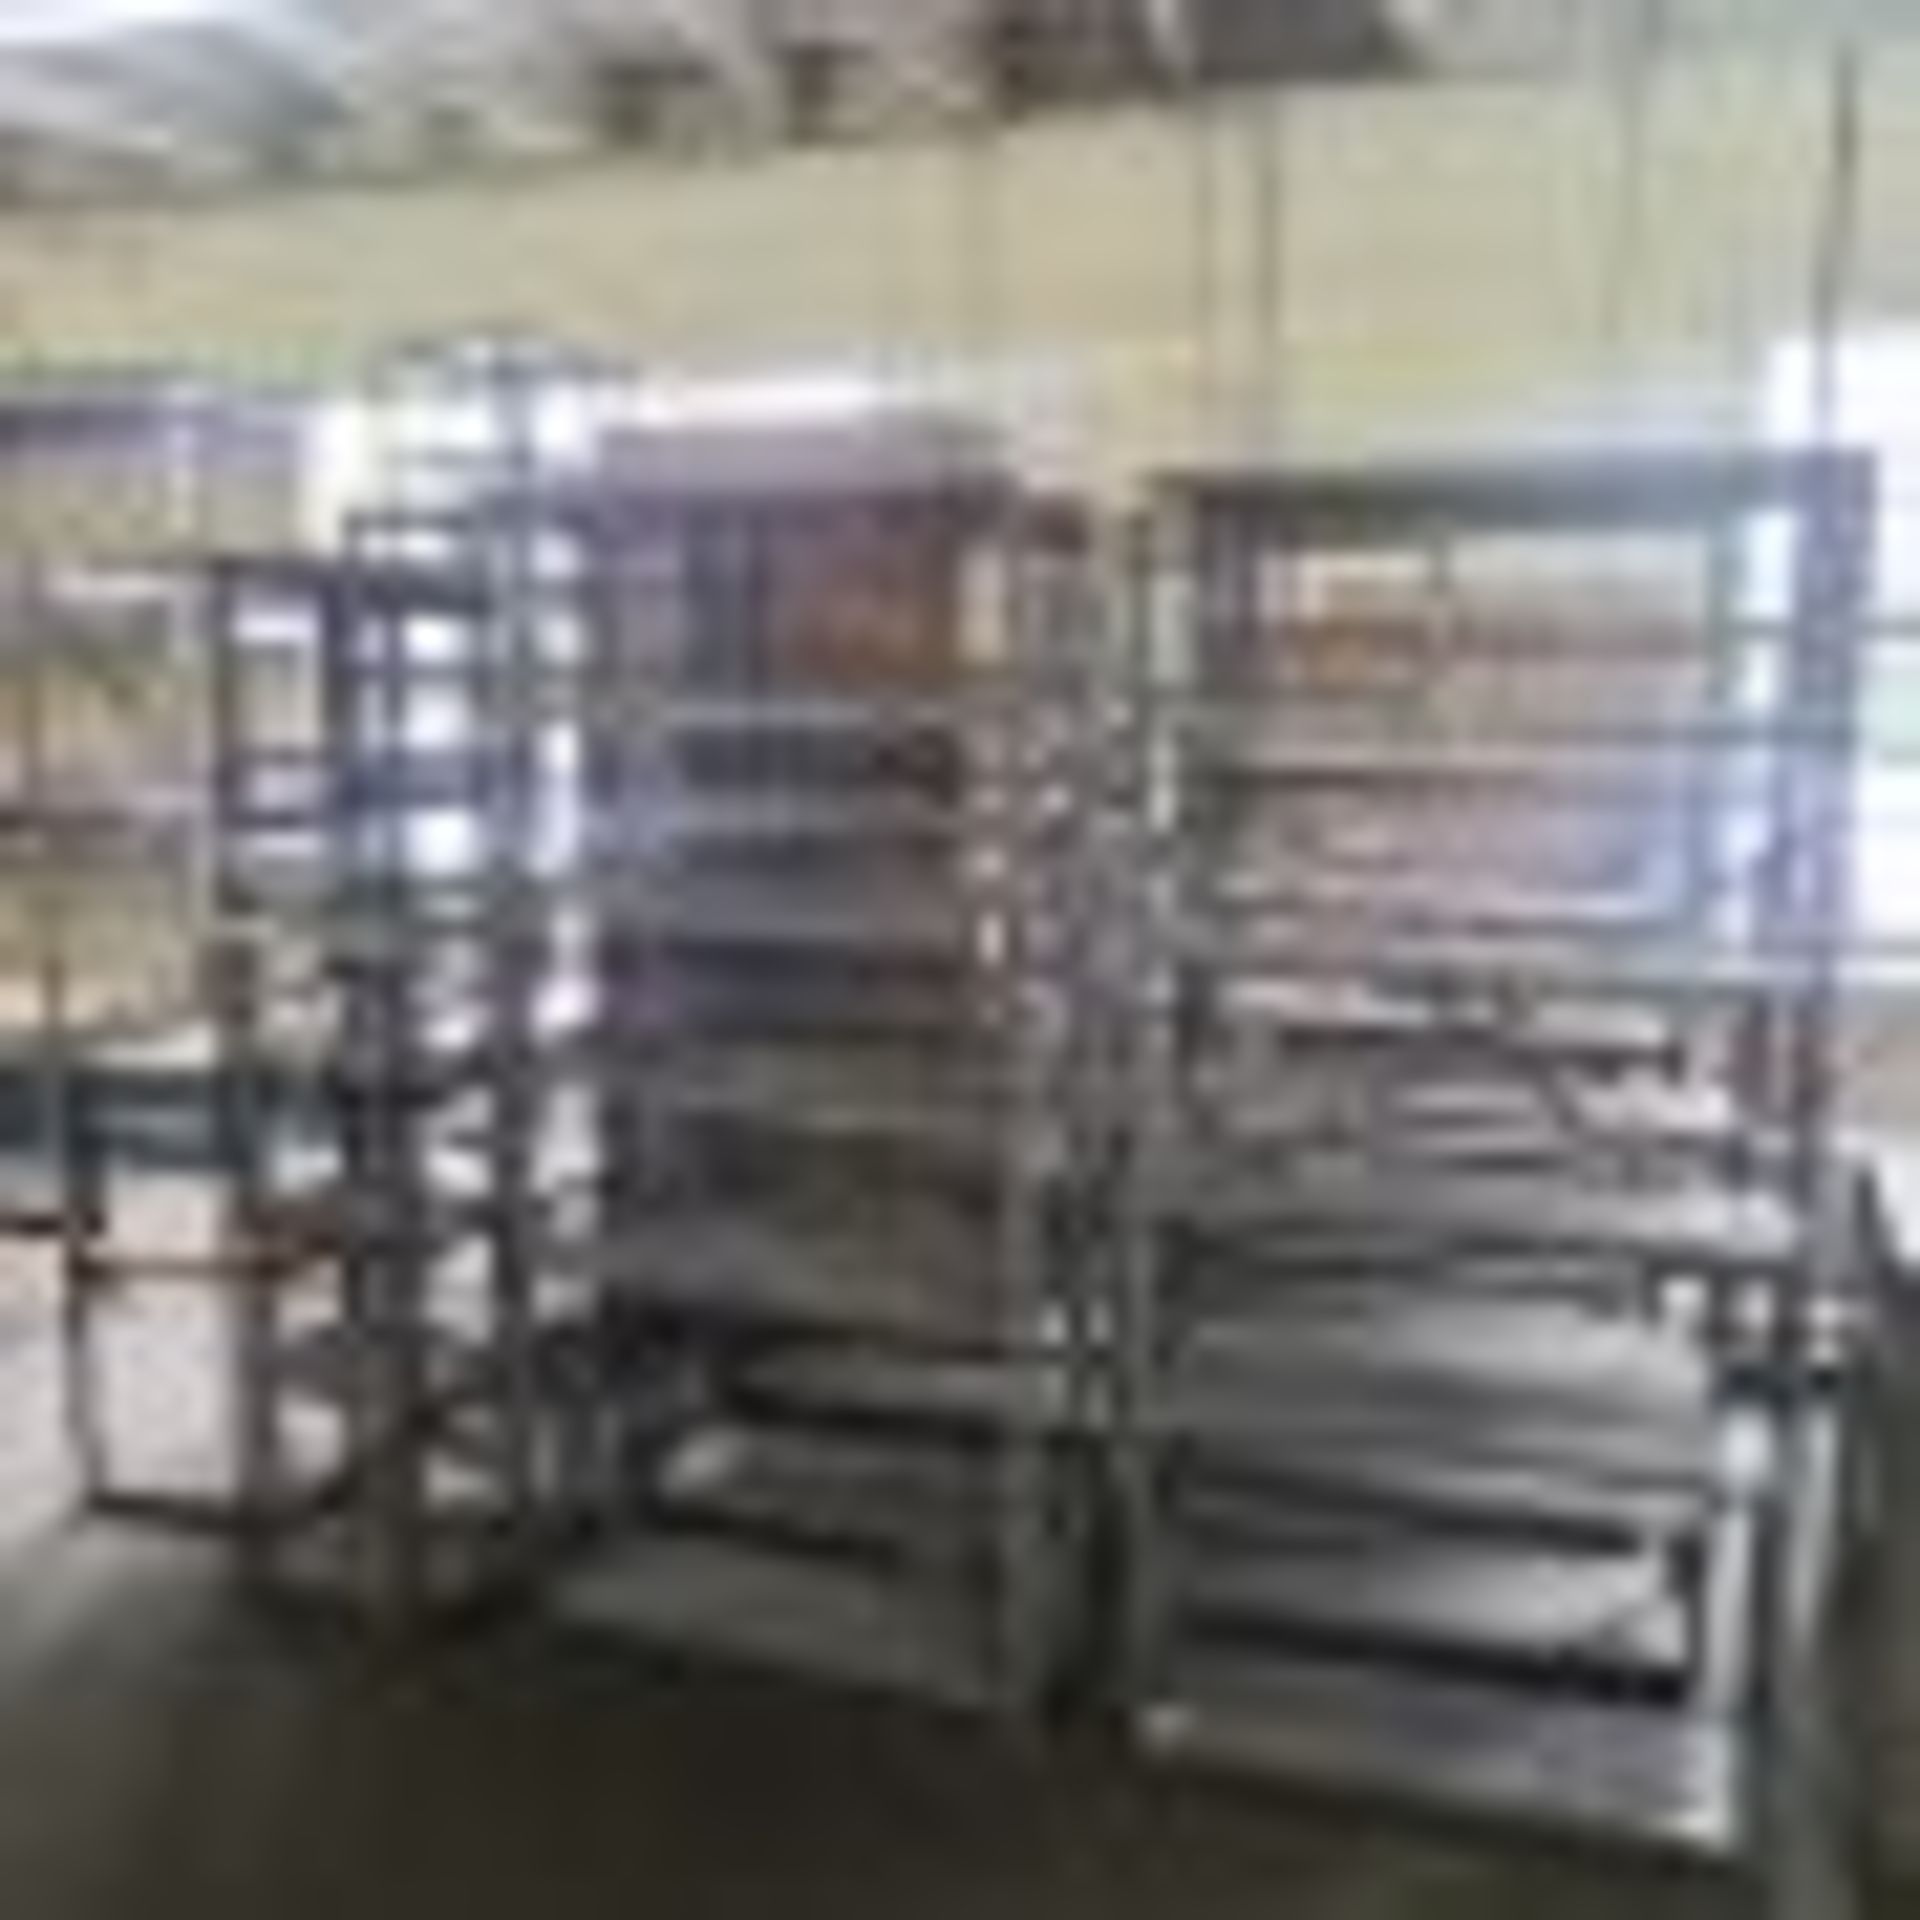 Shelving (SOLD AS-IS - NO WARRANTY)